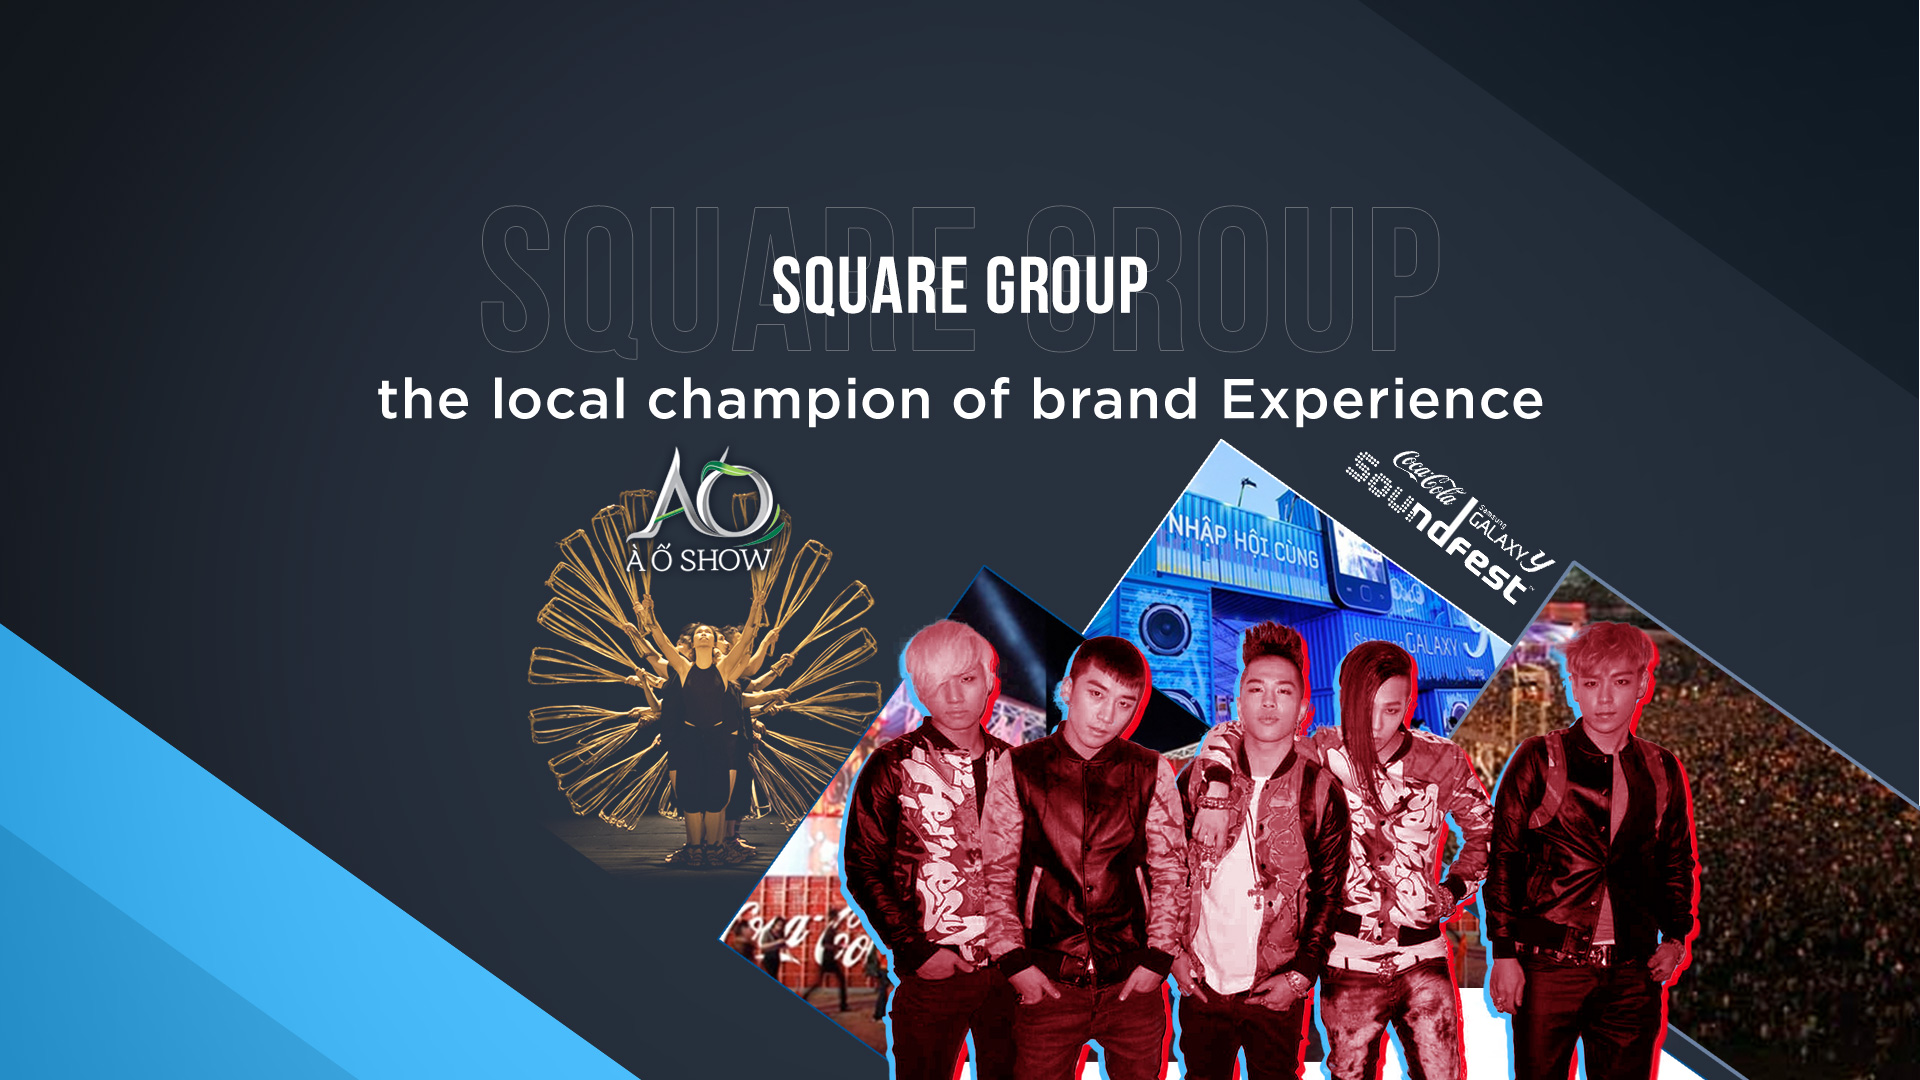 SQUARE GROUP